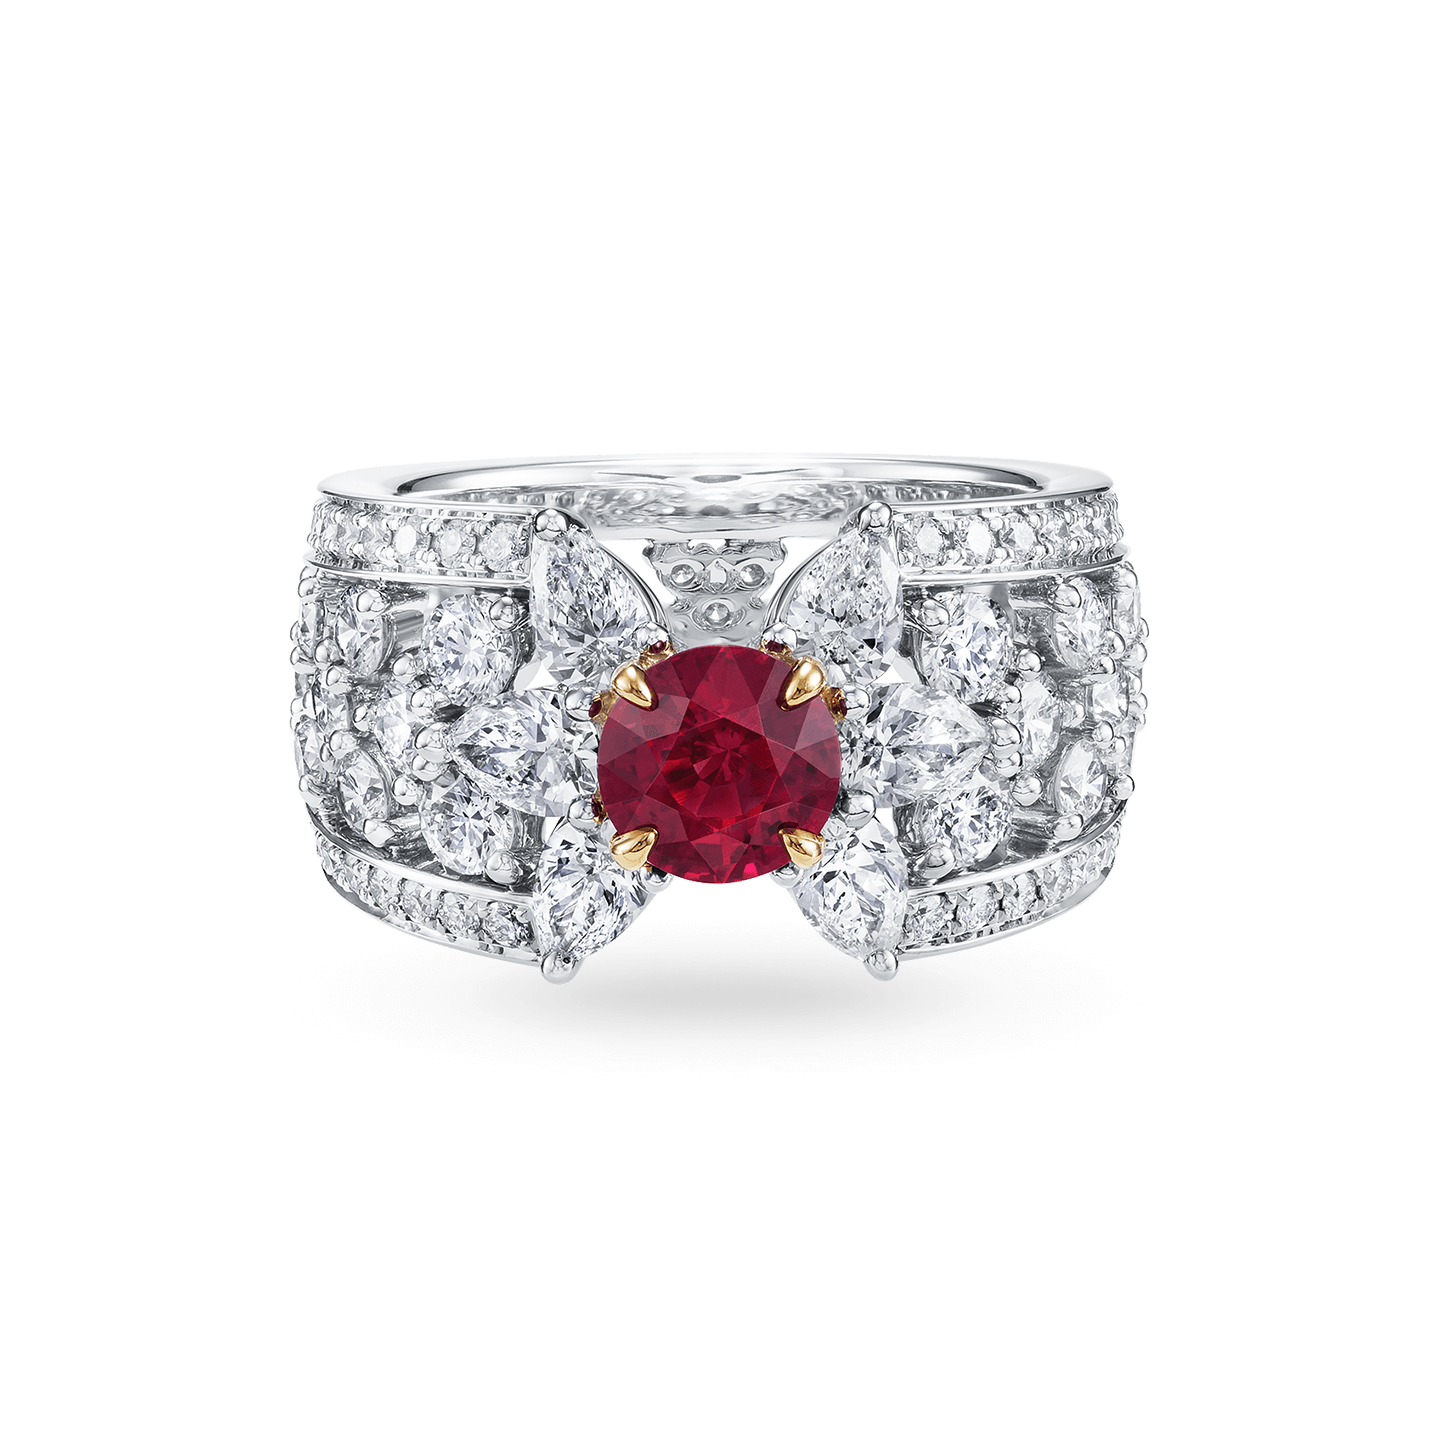 Limited Time Sale: Vintage Antique Design 1.25 Carat Red Ruby and Diamond  Engagement Ring in 10k Rose Gold for Women on Sale - Walmart.com